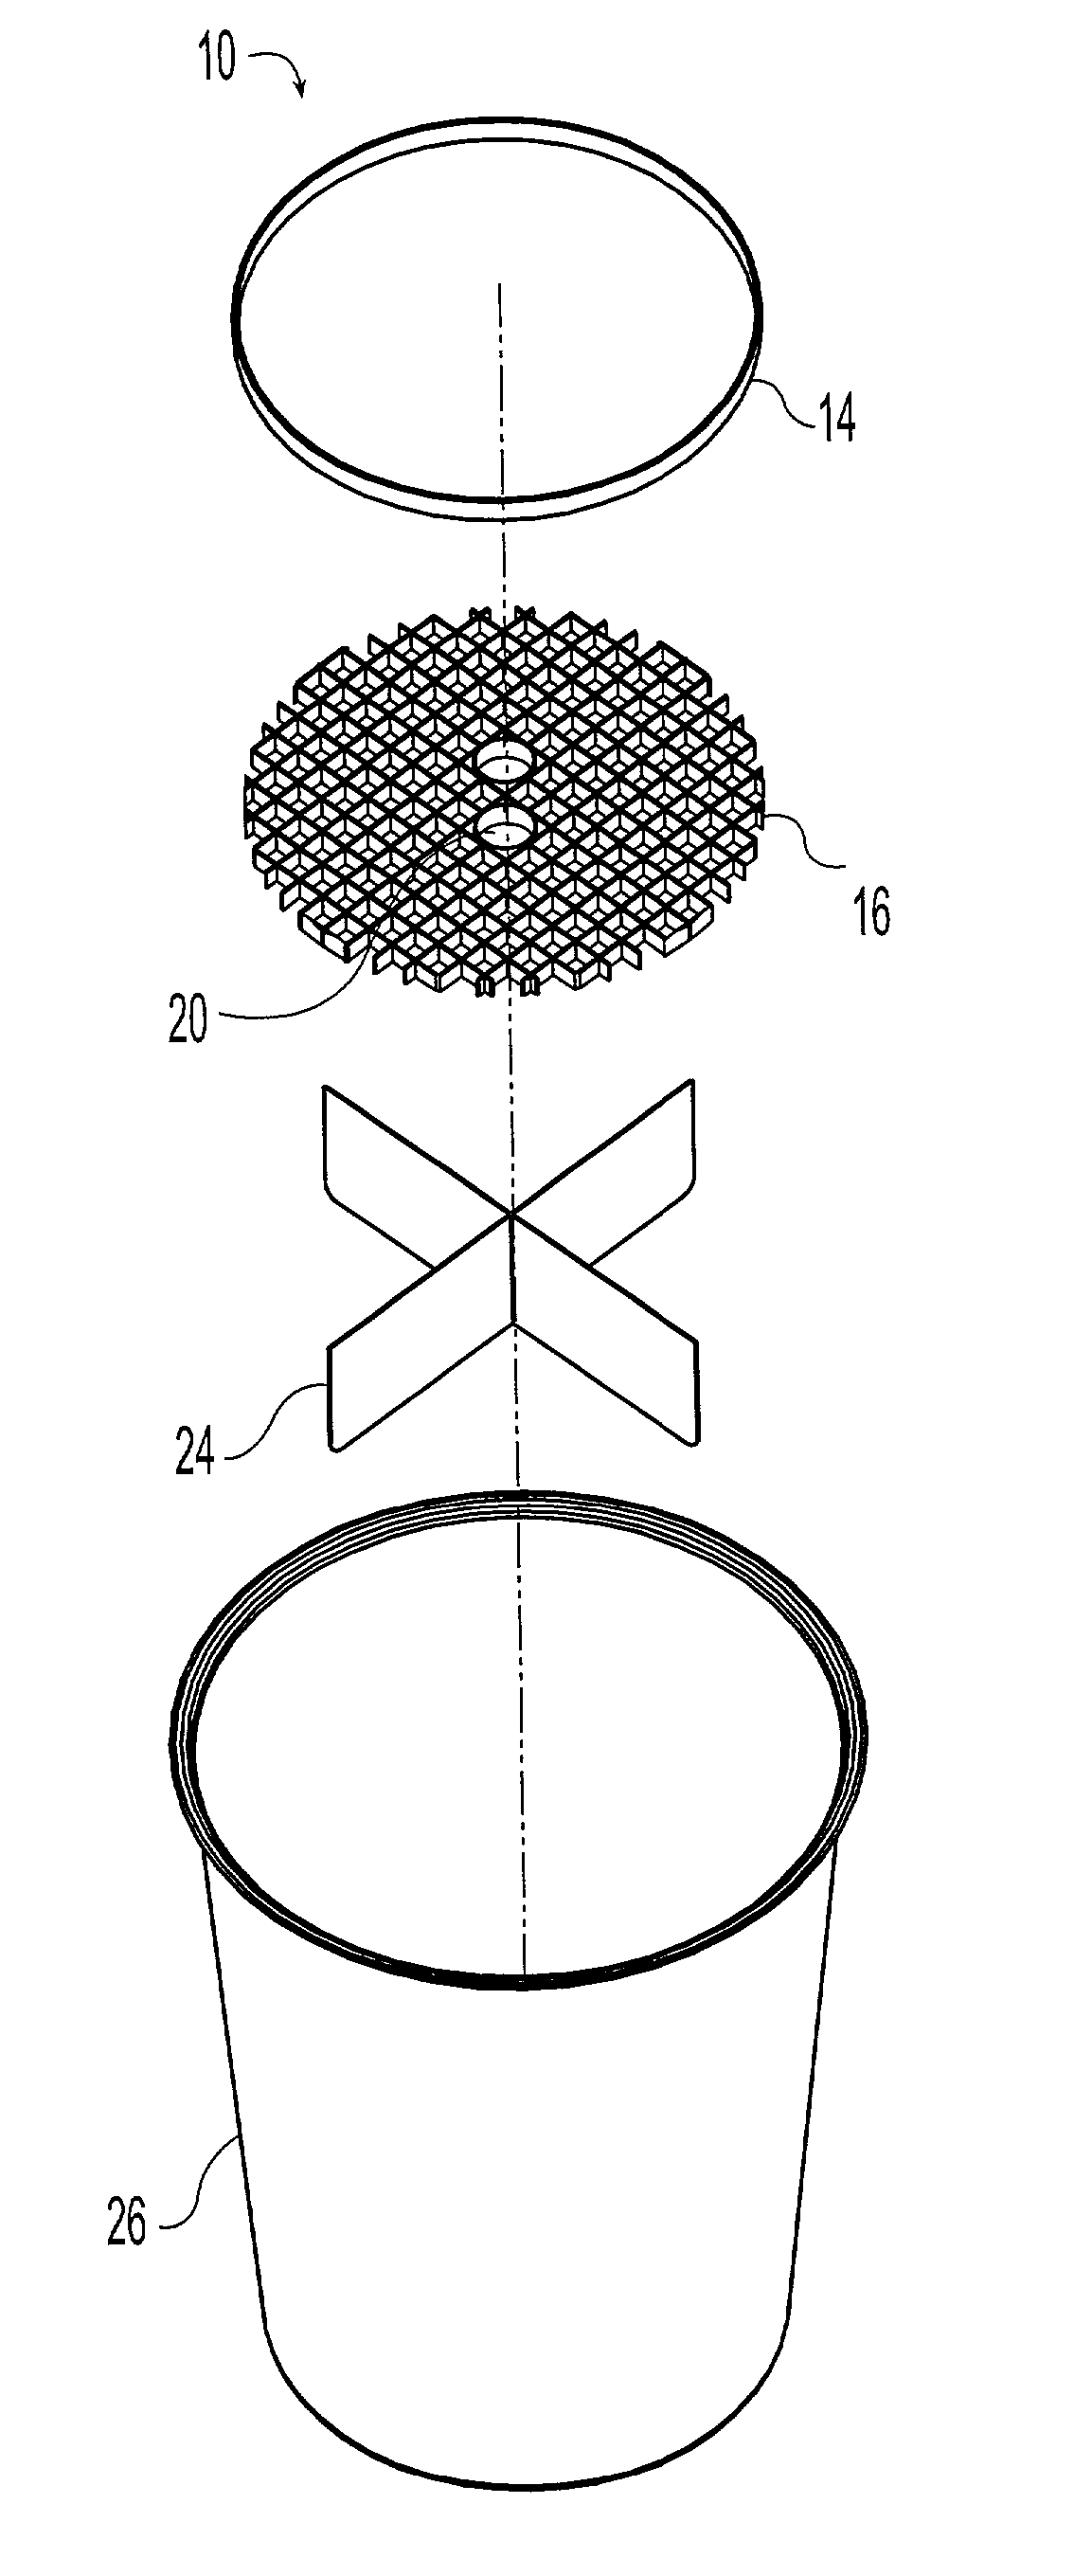 Fluid receptacle and filter system